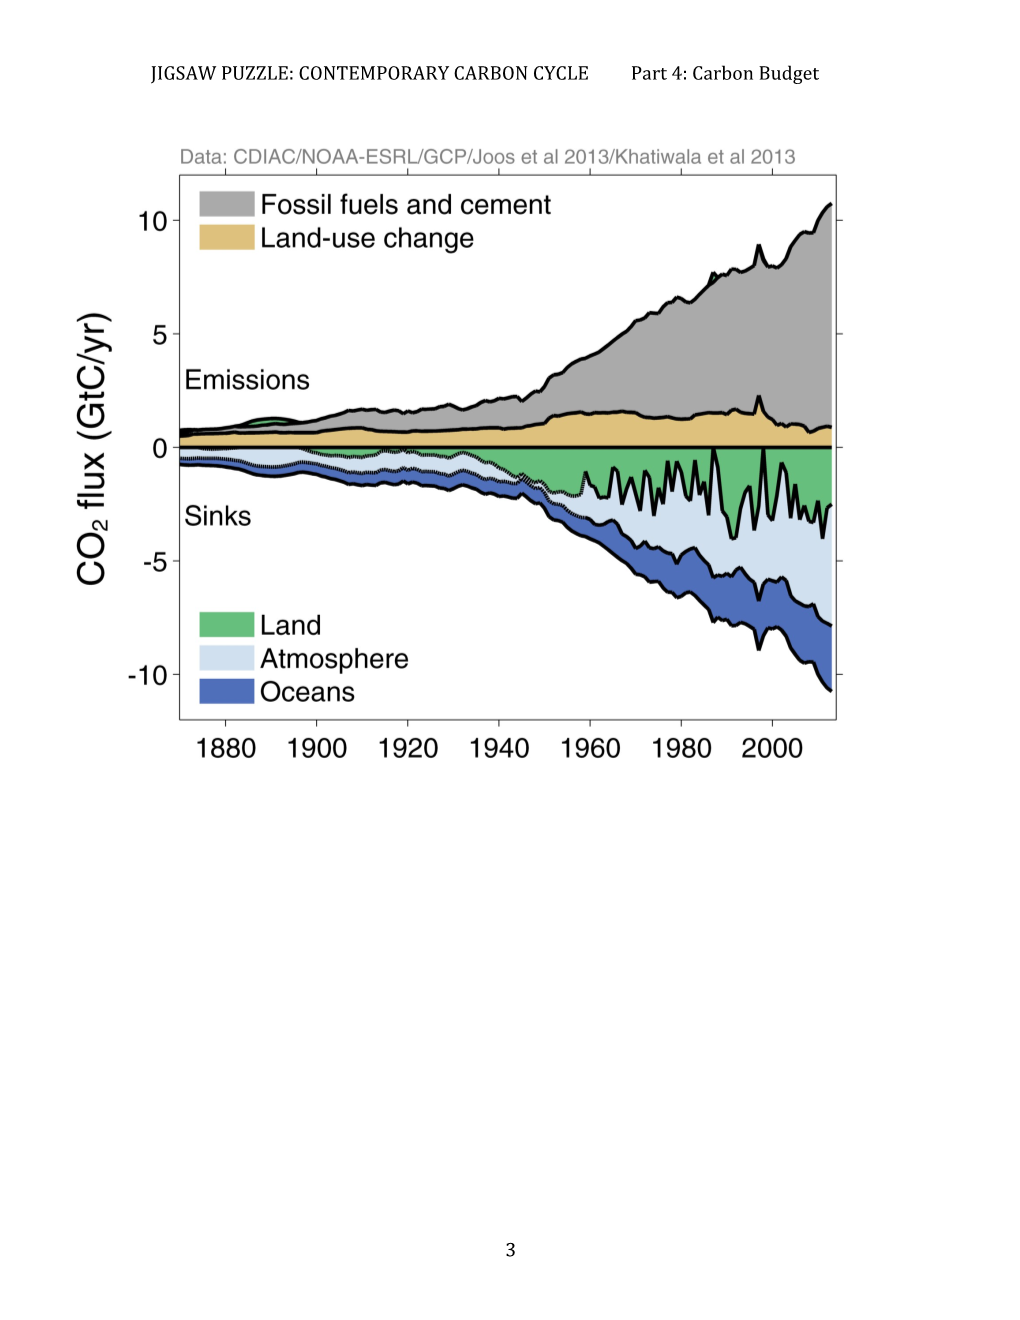 What Is the Overall Budget for Contemporary CO2?